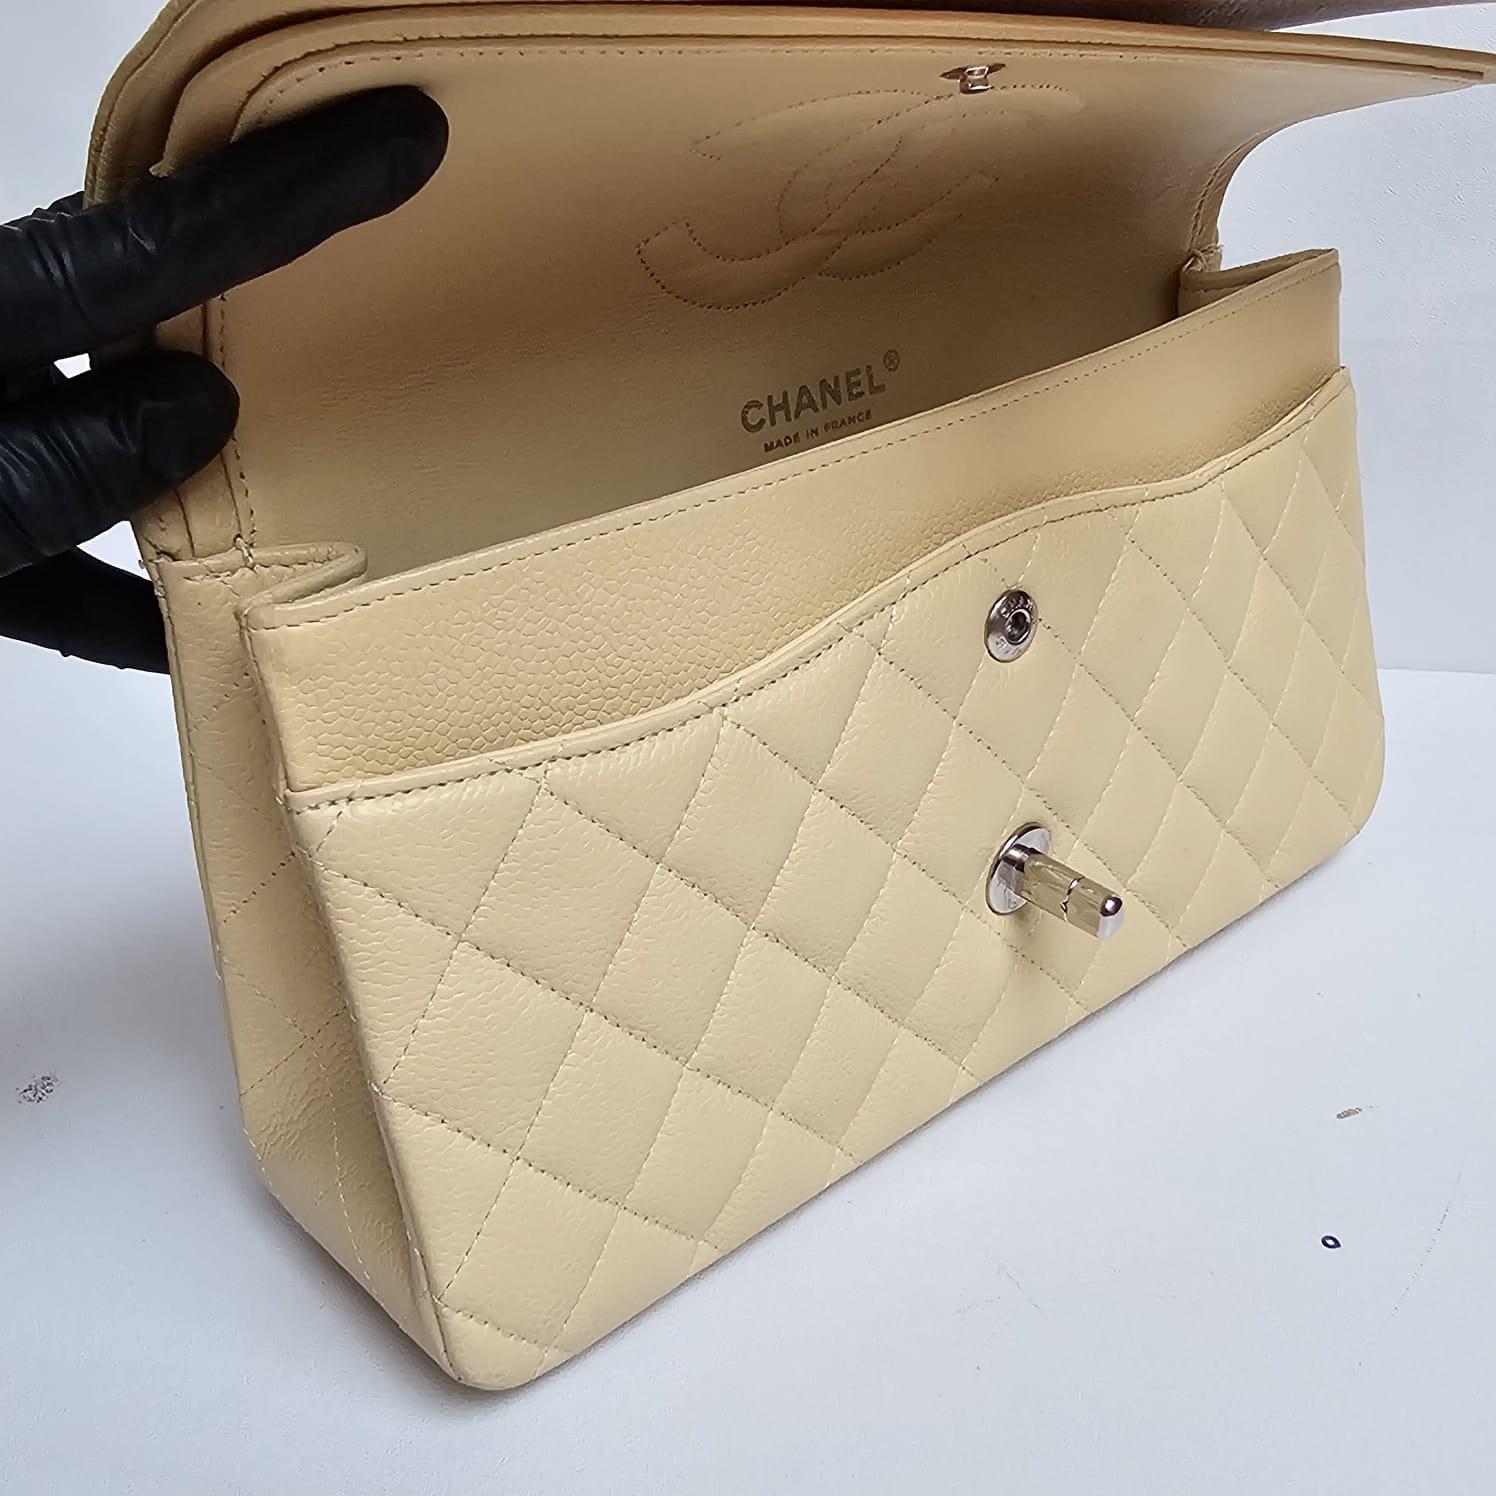 Beatiful classic chanel medium flap in pastel yellow color (almost lighter beige-like) with silver hardware. Series #11 from mid 2000s. Overall still in very good condition. Comes with its holo, card and replacement dust bag.